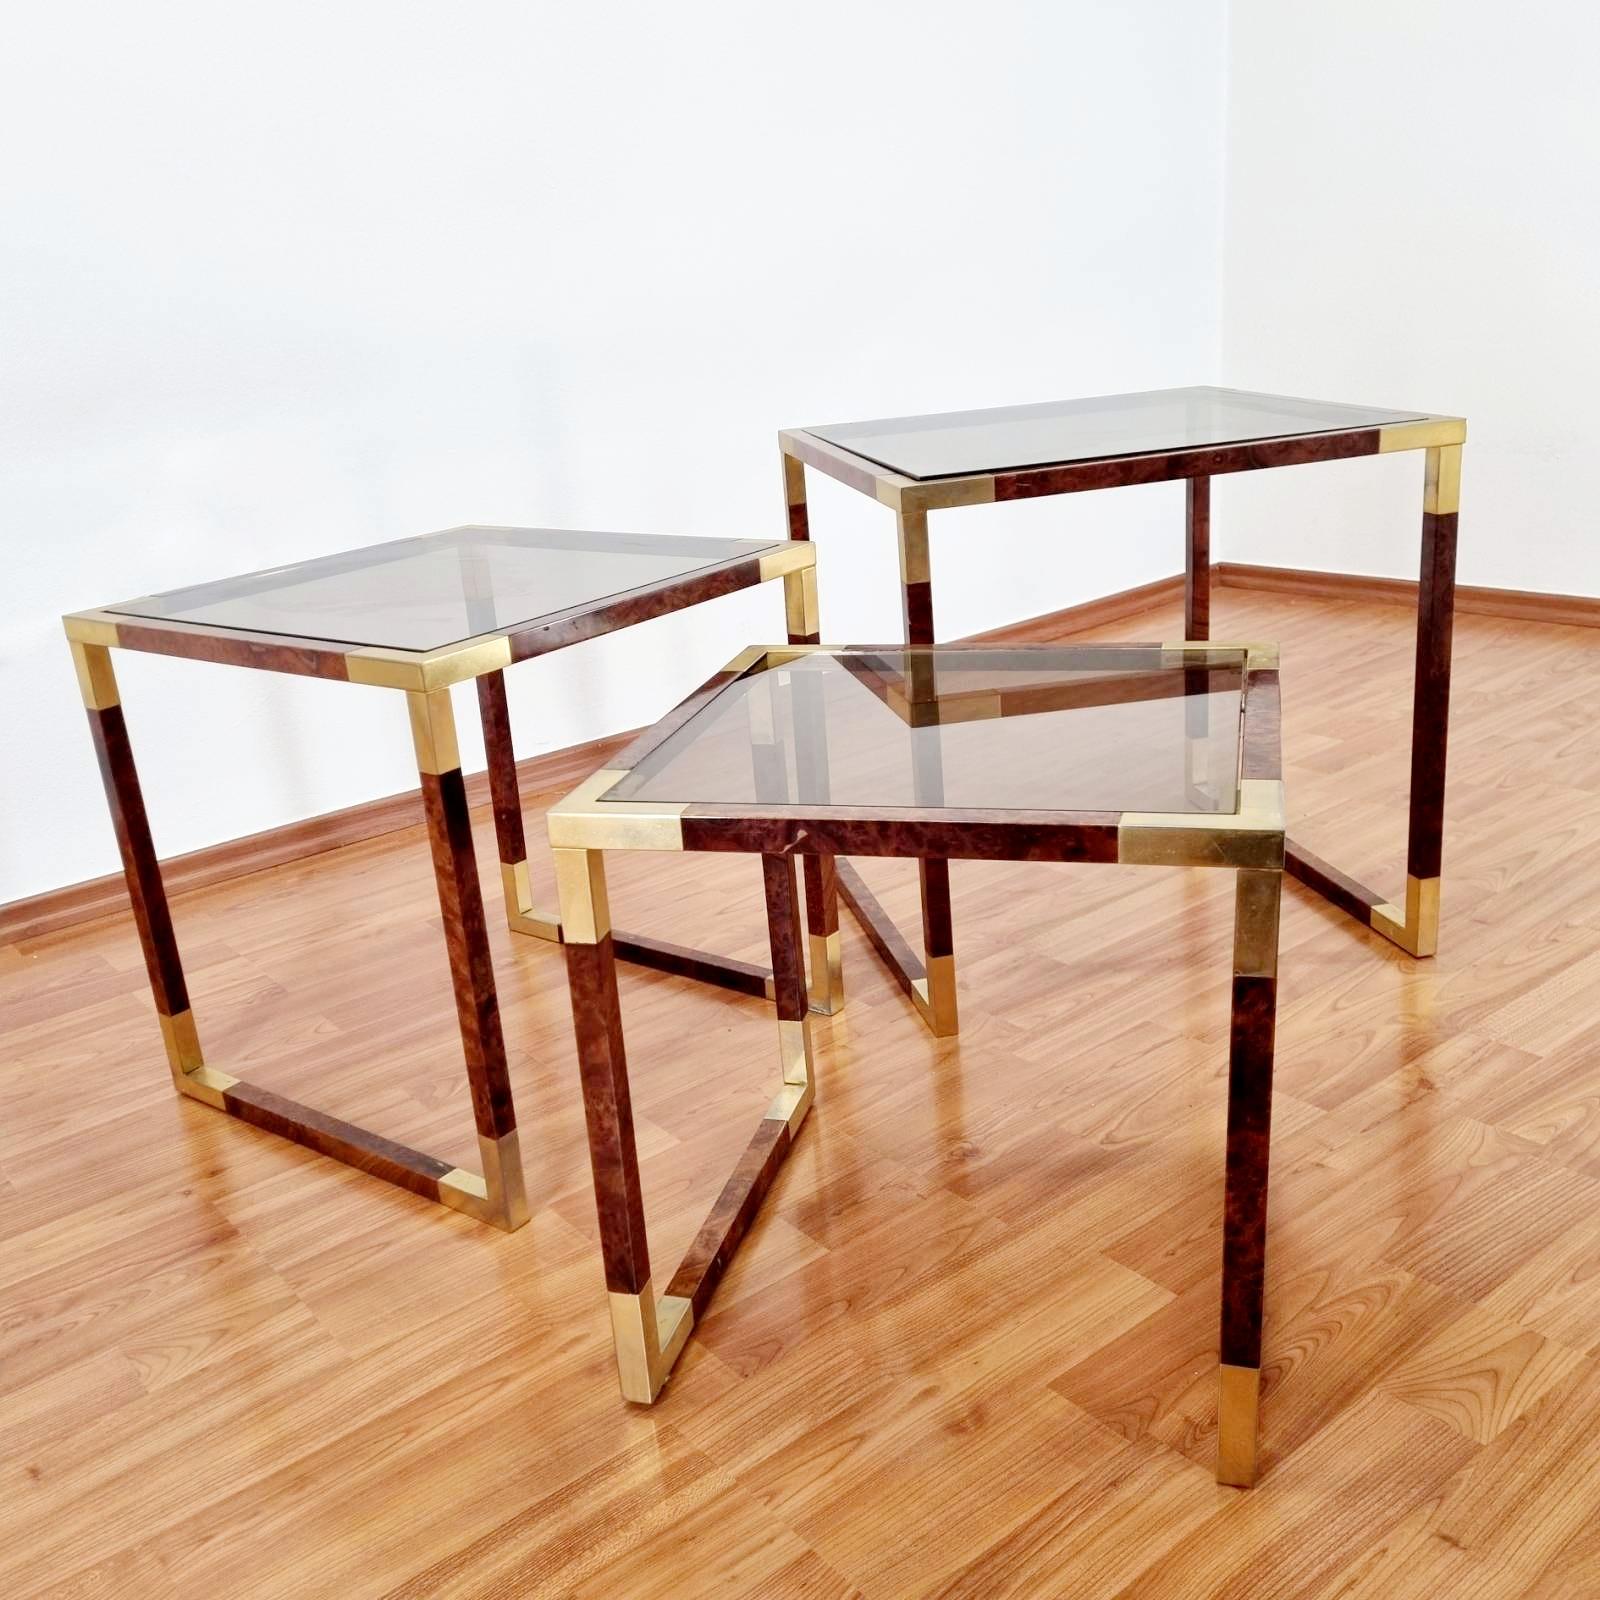 Midcentury Nesting Brass and Briar Coffee Tables, Italy, 1970s For Sale 2